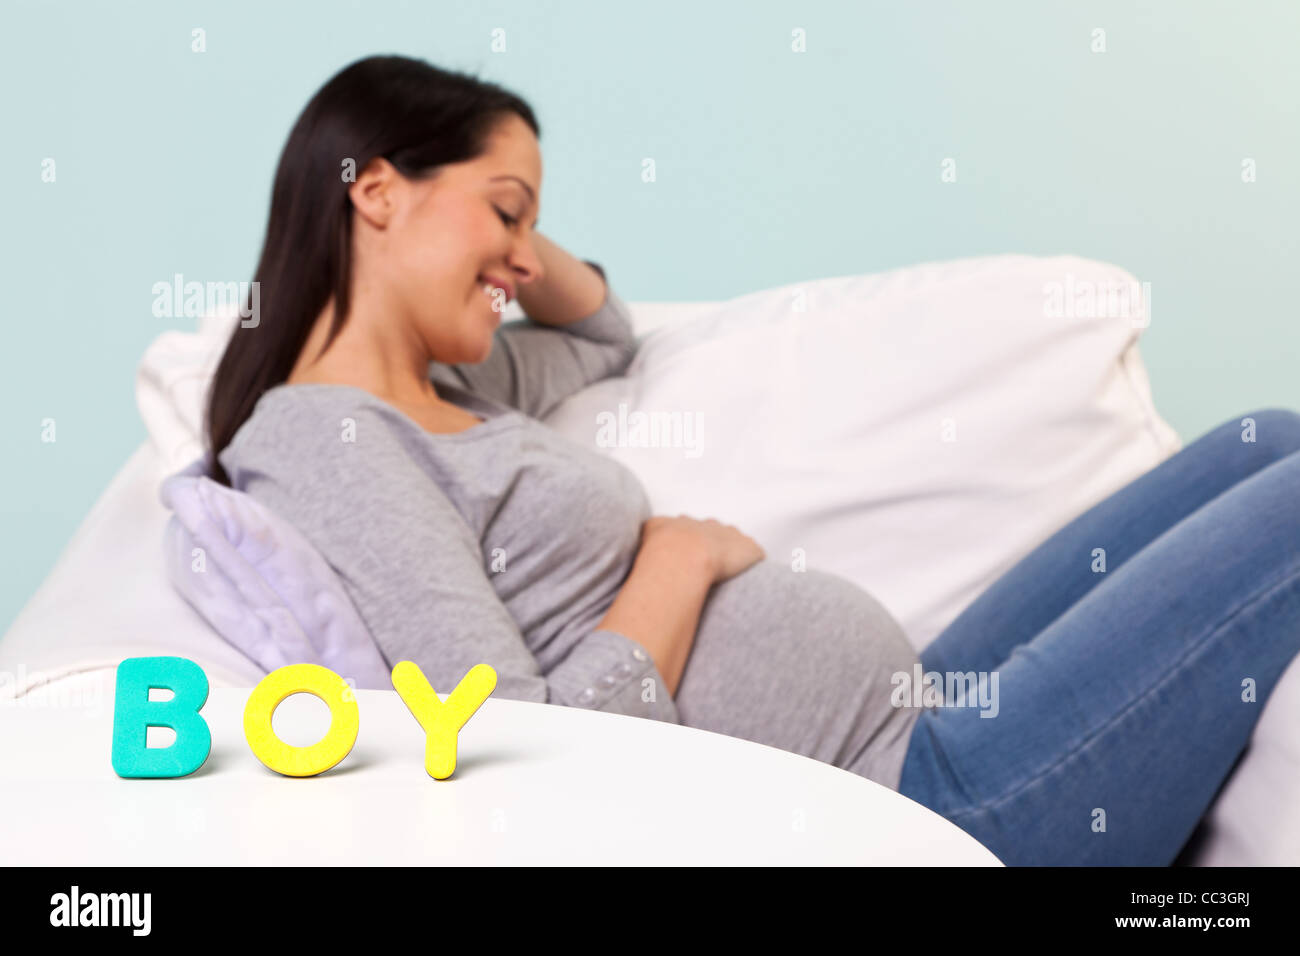 Photo of a pregnant woman at home sitting in an armchair, focus on the word BOY on the table in front. Stock Photo